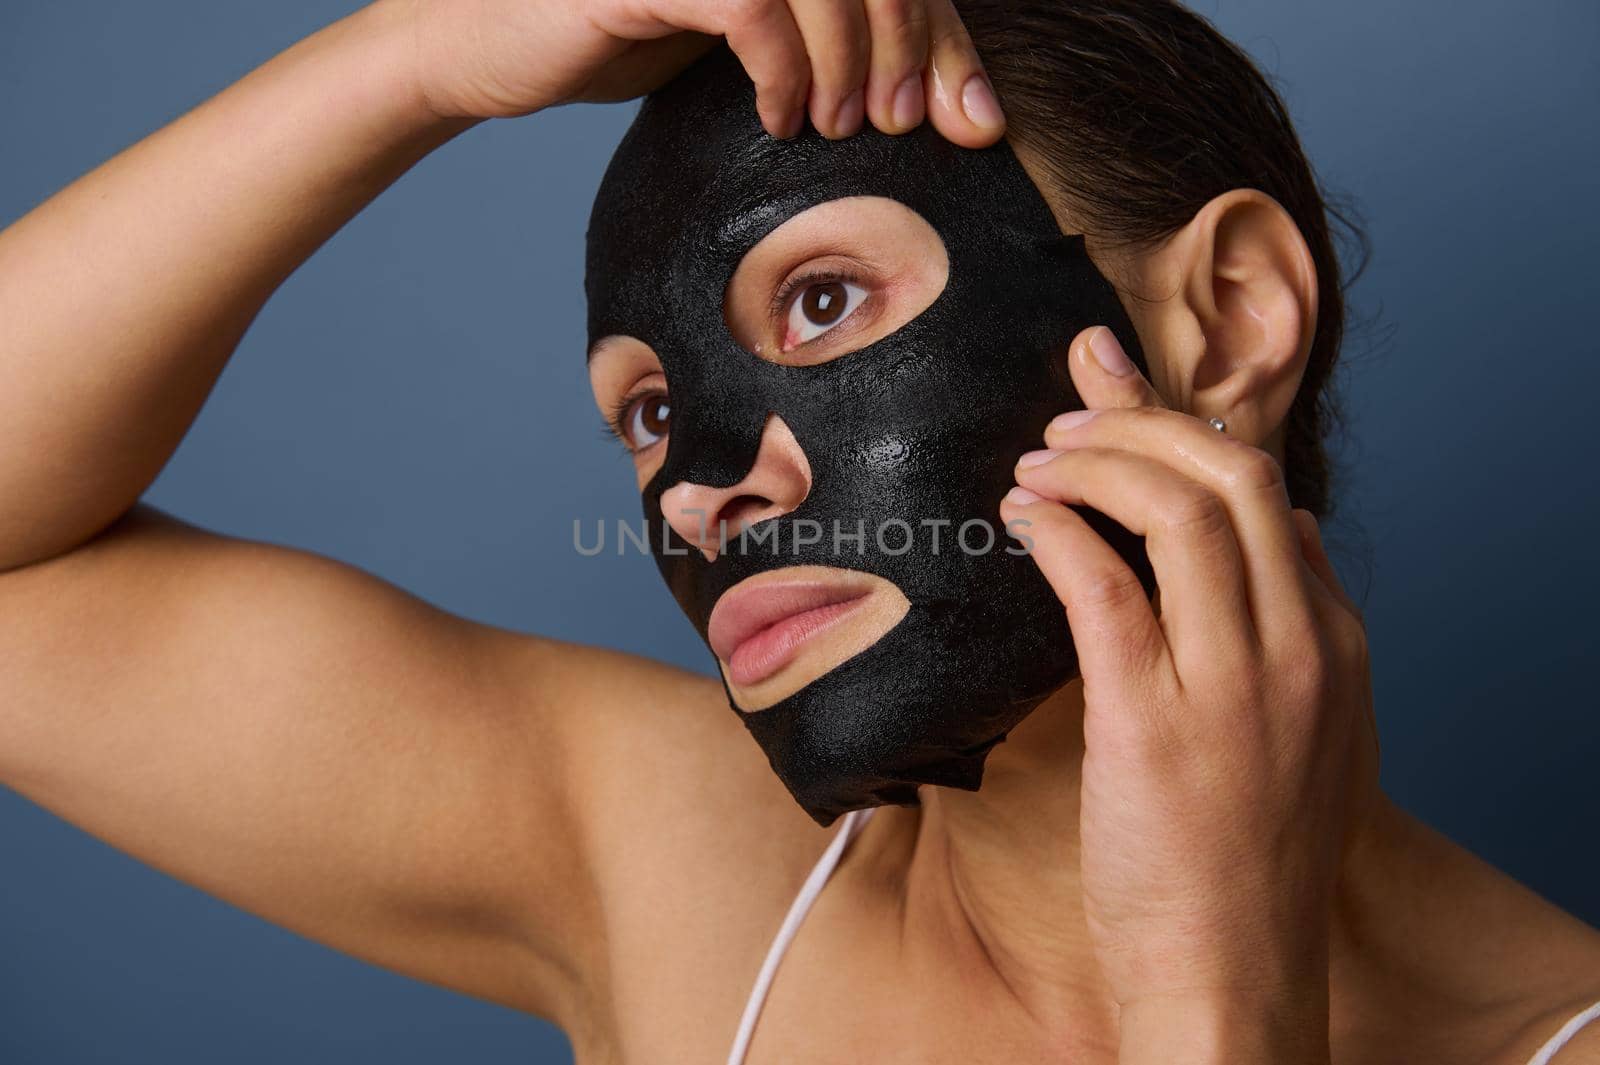 Beautiful woman puts on a hydrating smoothing nourishing cleansing black fabric mask on her face, isolated over a gray background with copy space. Skin care, cosmetology, home spa concept. Close-up by artgf